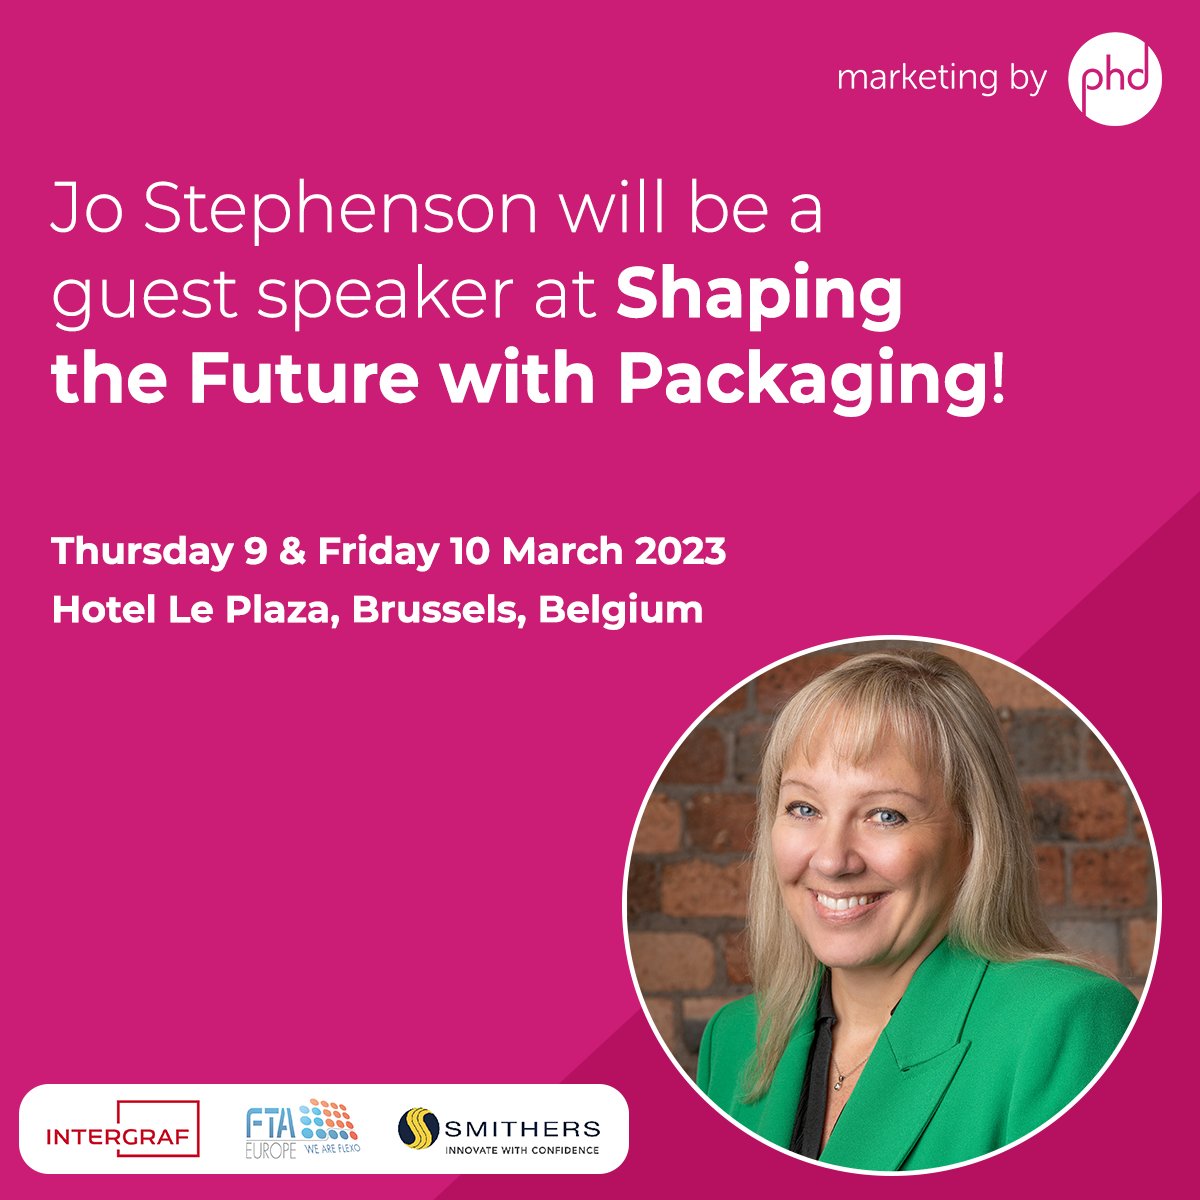 ⏳One week to go until our Managing Director, Jo Stephenson, moderates Shaping the Future with Packaging!

To register for the event, click here: docs.google.com/forms/d/e/1FAI…

#PrintingIndustry #PackagingIndustry #Event #FlexoPrinting #PHDMarketing #B2BMarketing